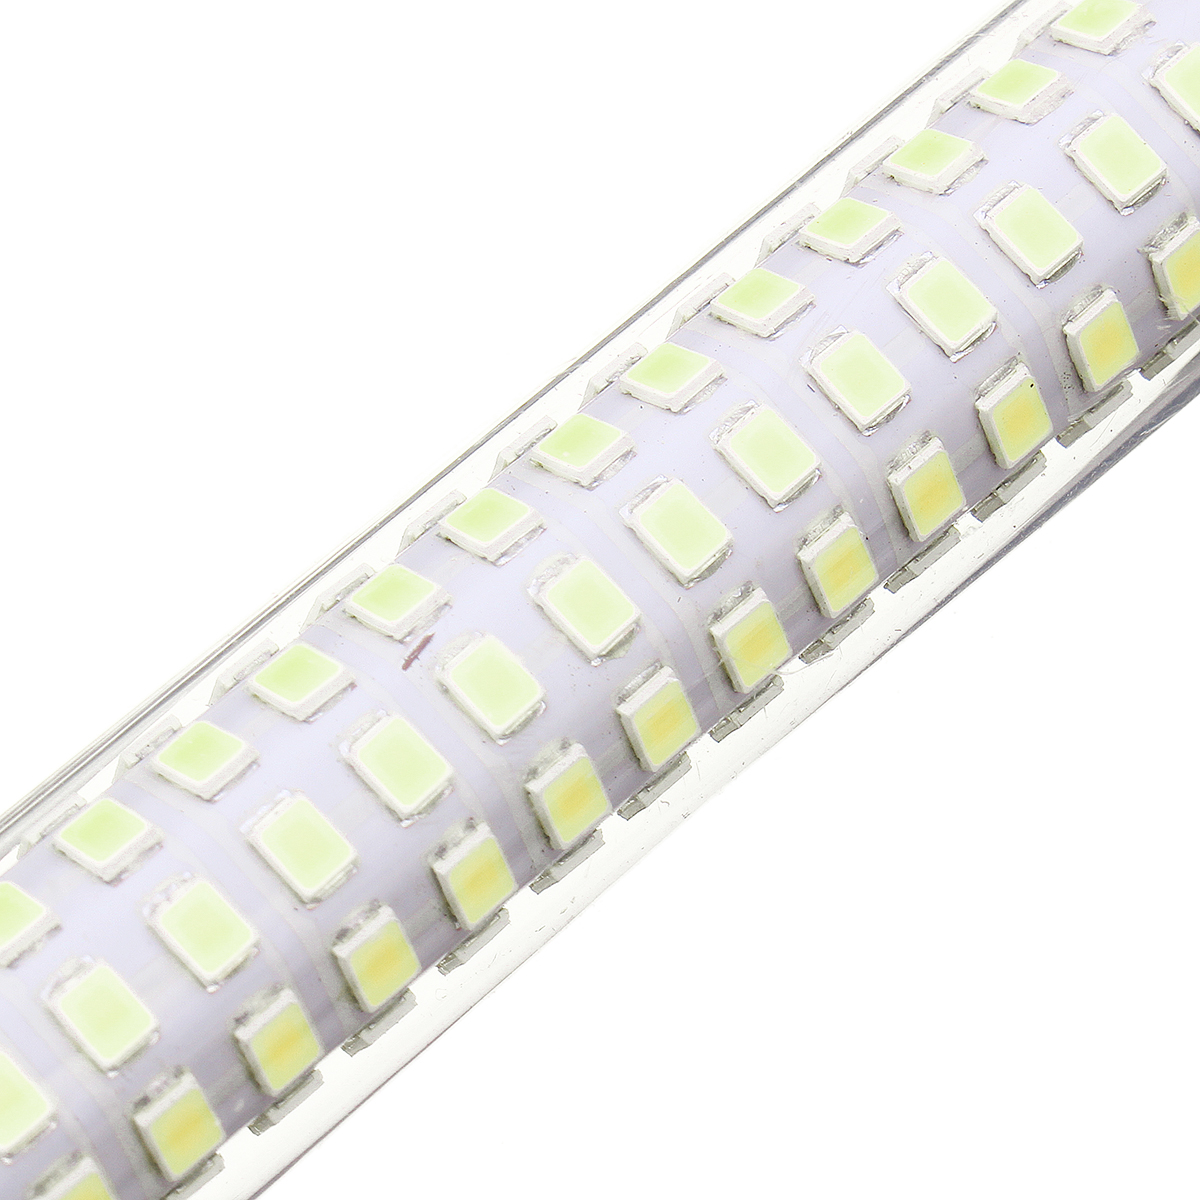 6W-R7S-2835-SMD-Non-dimmable-LED-Flood-Light-Replaces-Halogen-Lamp-Ceramics--High-Bright-AC220-265V-1282825-5